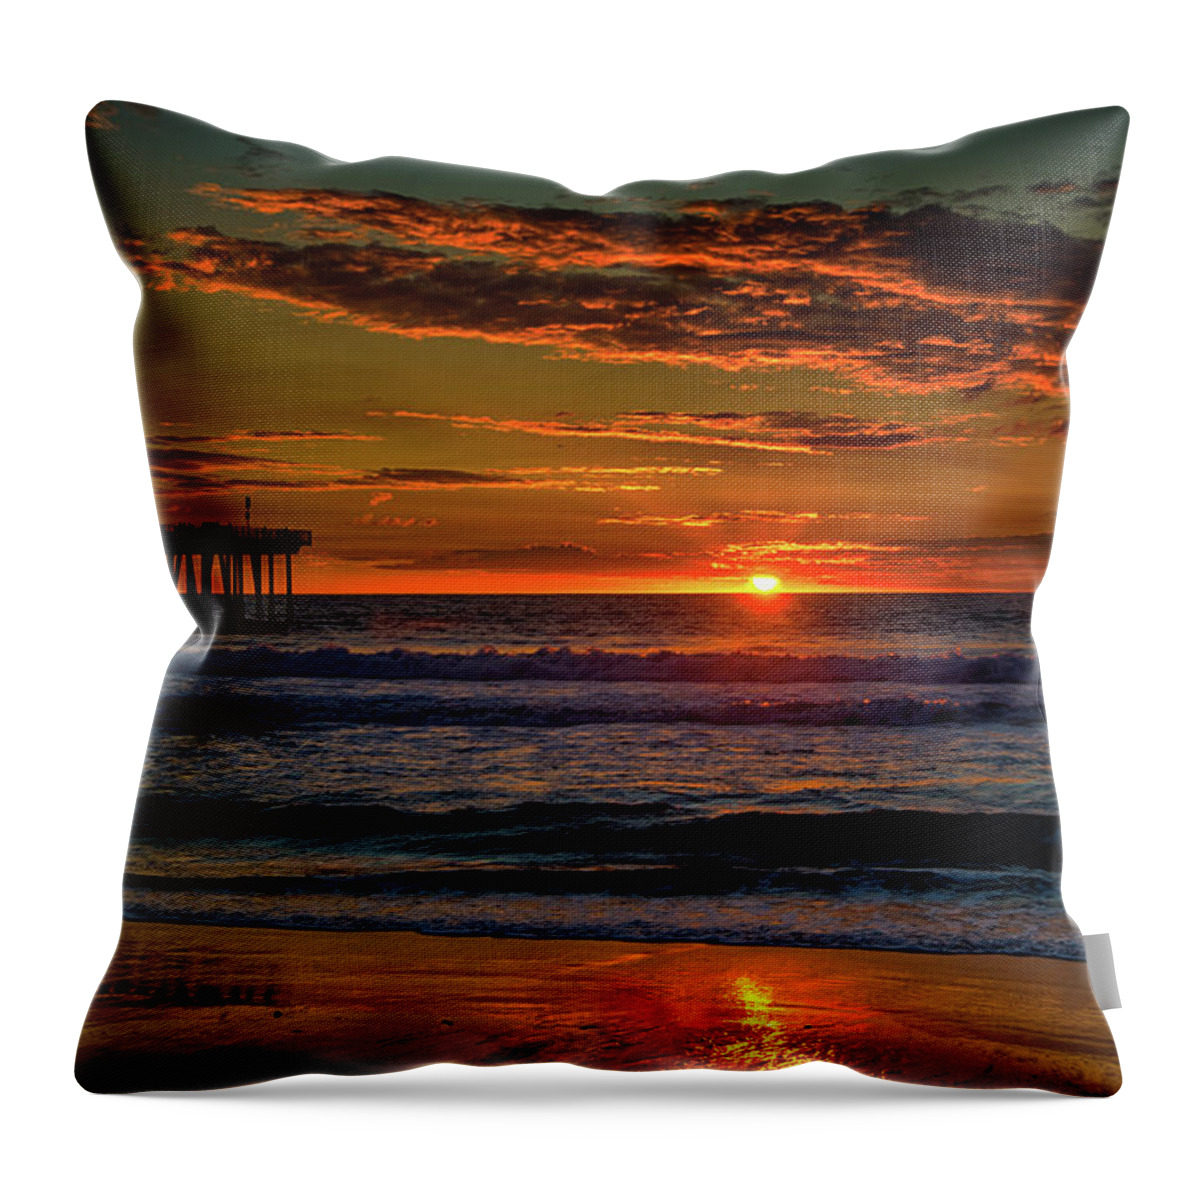 La Throw Pillow featuring the photograph West Coast Sunset by Raf Winterpacht